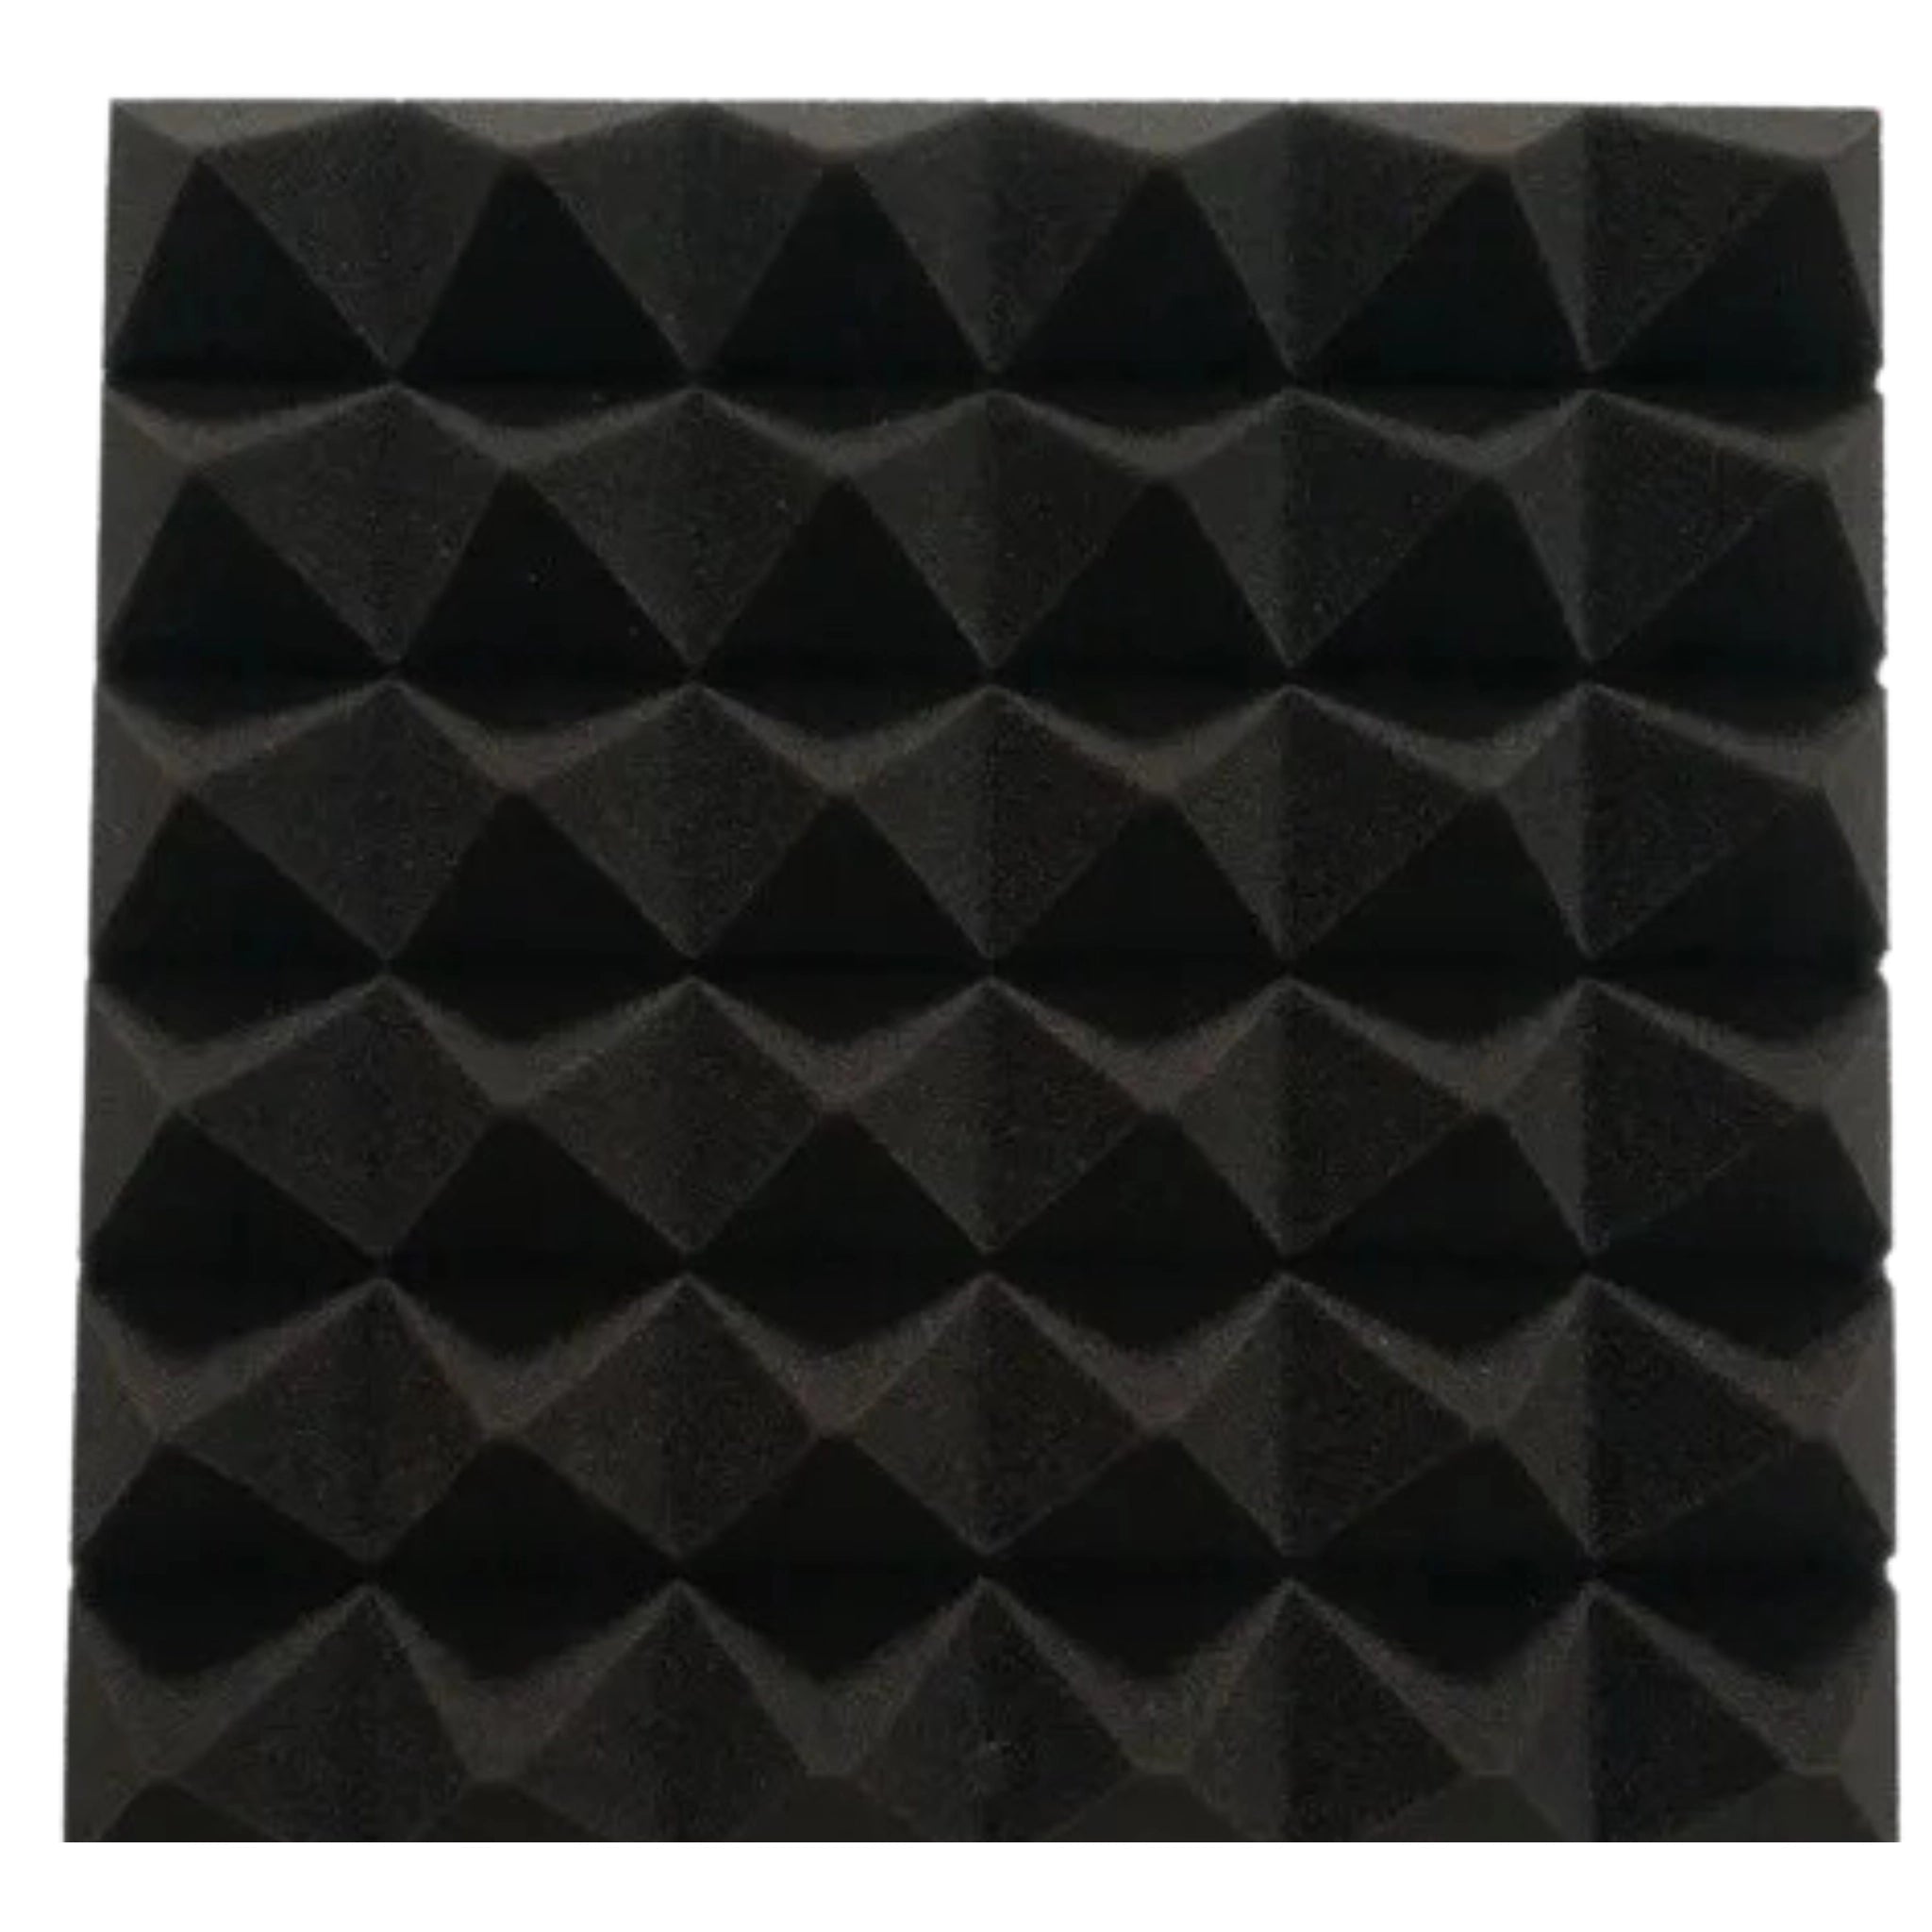 Black acoustic foam panel with pyramid texture for sound absorption